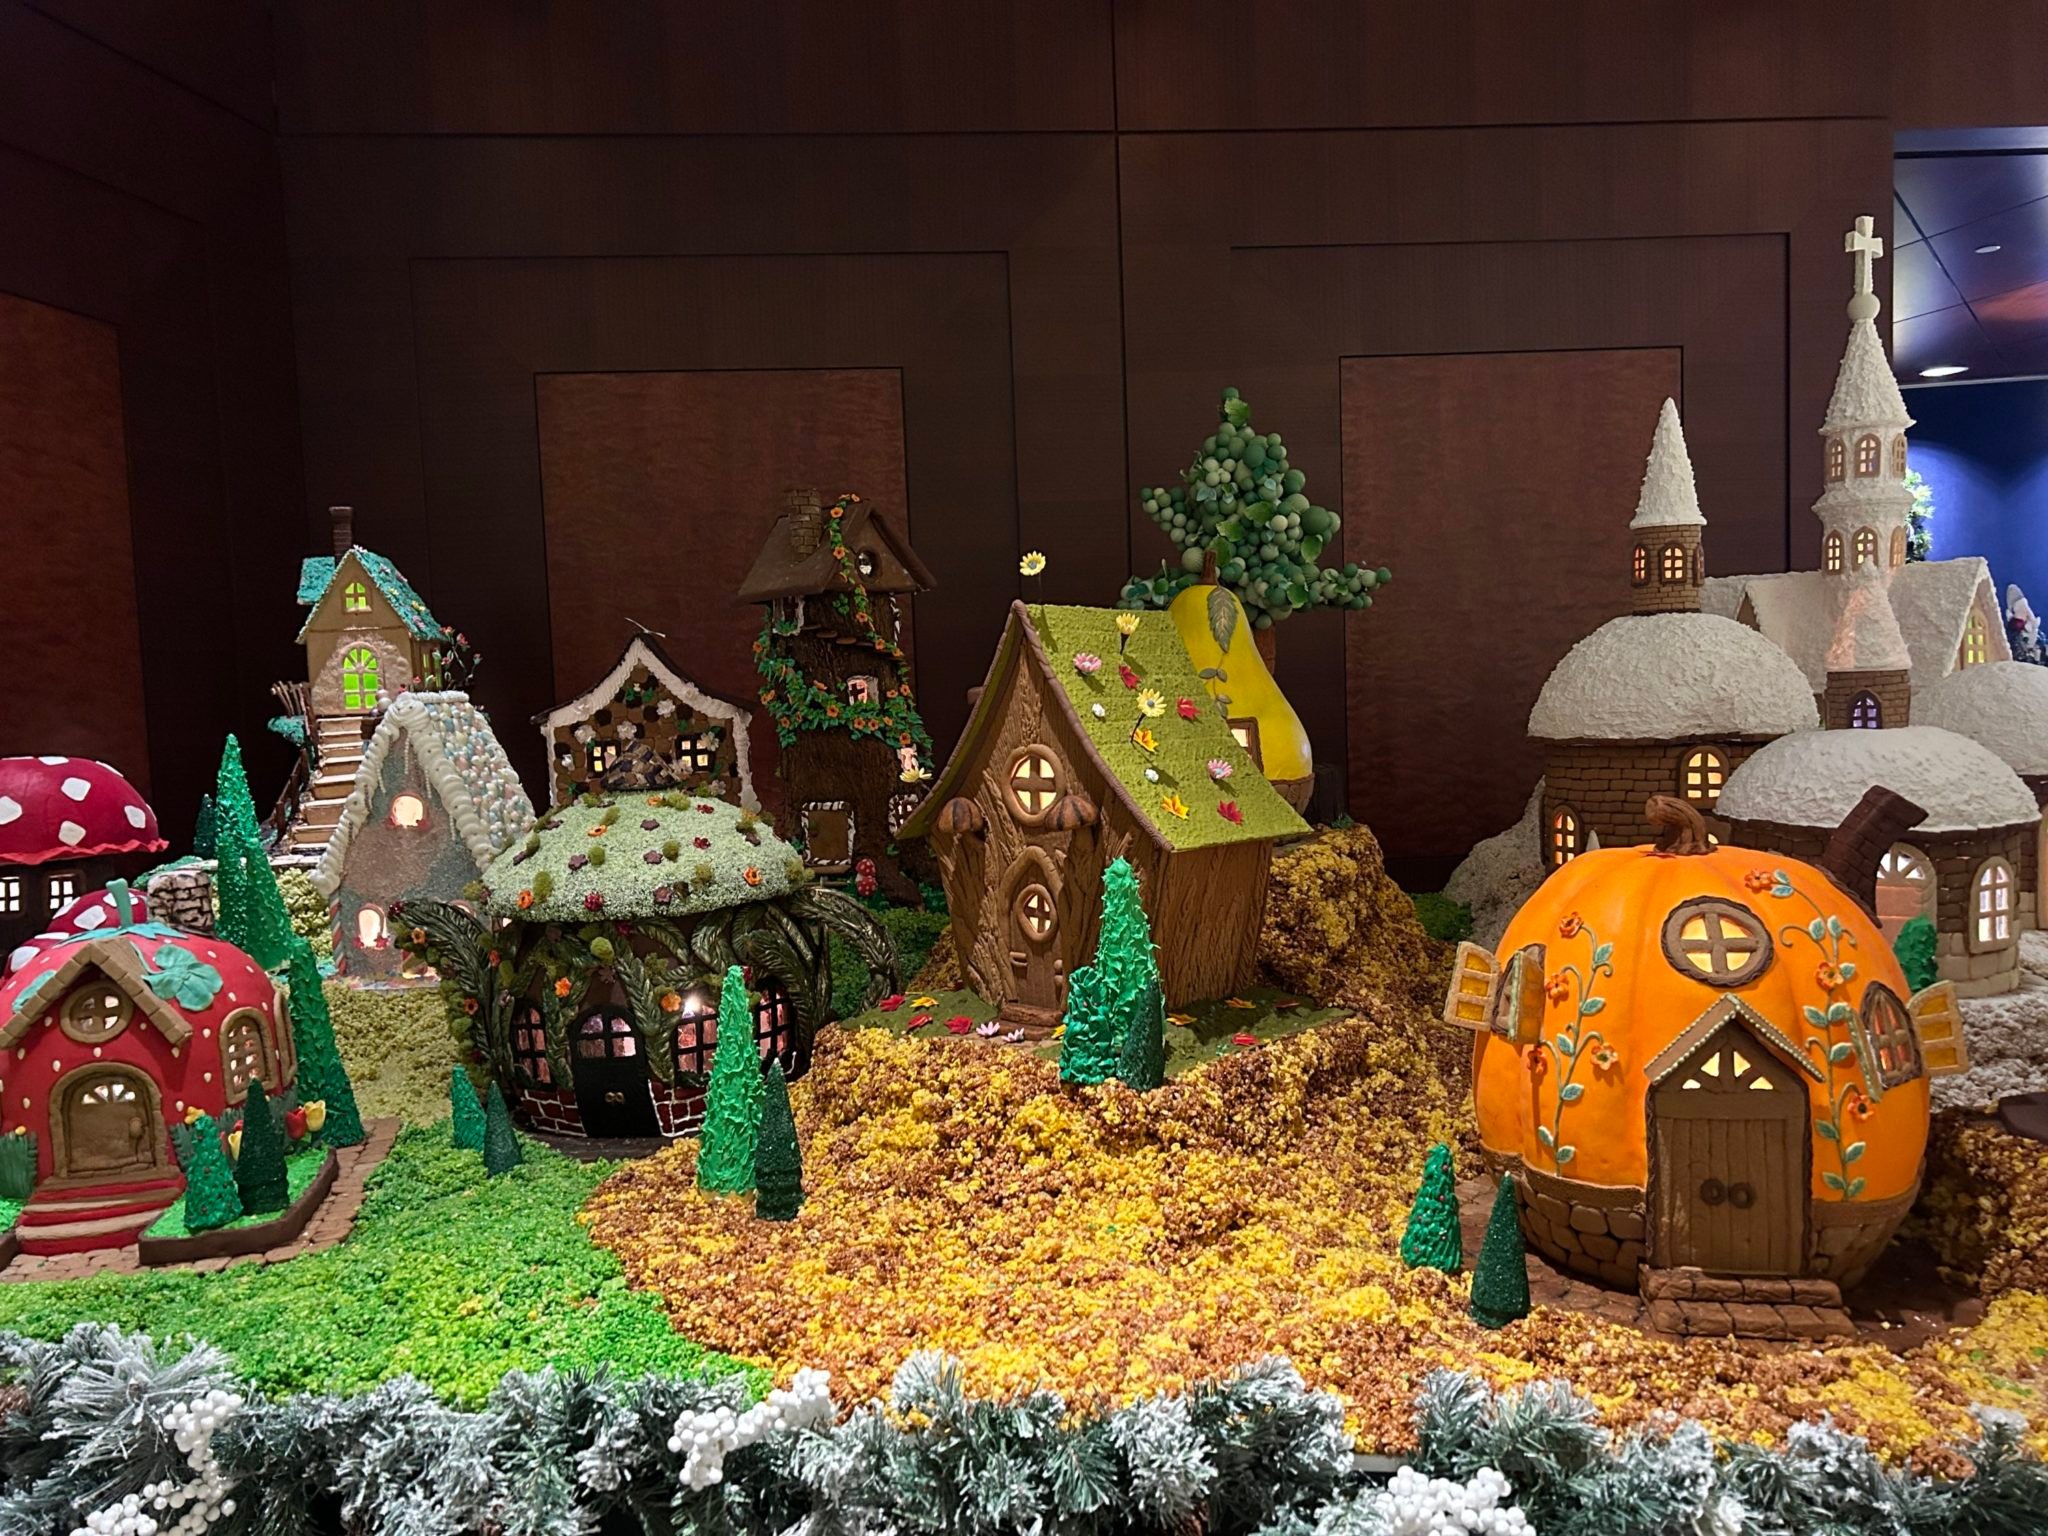 The fairy village at Gaylord National Resort. Photo courtesy of Gaylord National Resort.